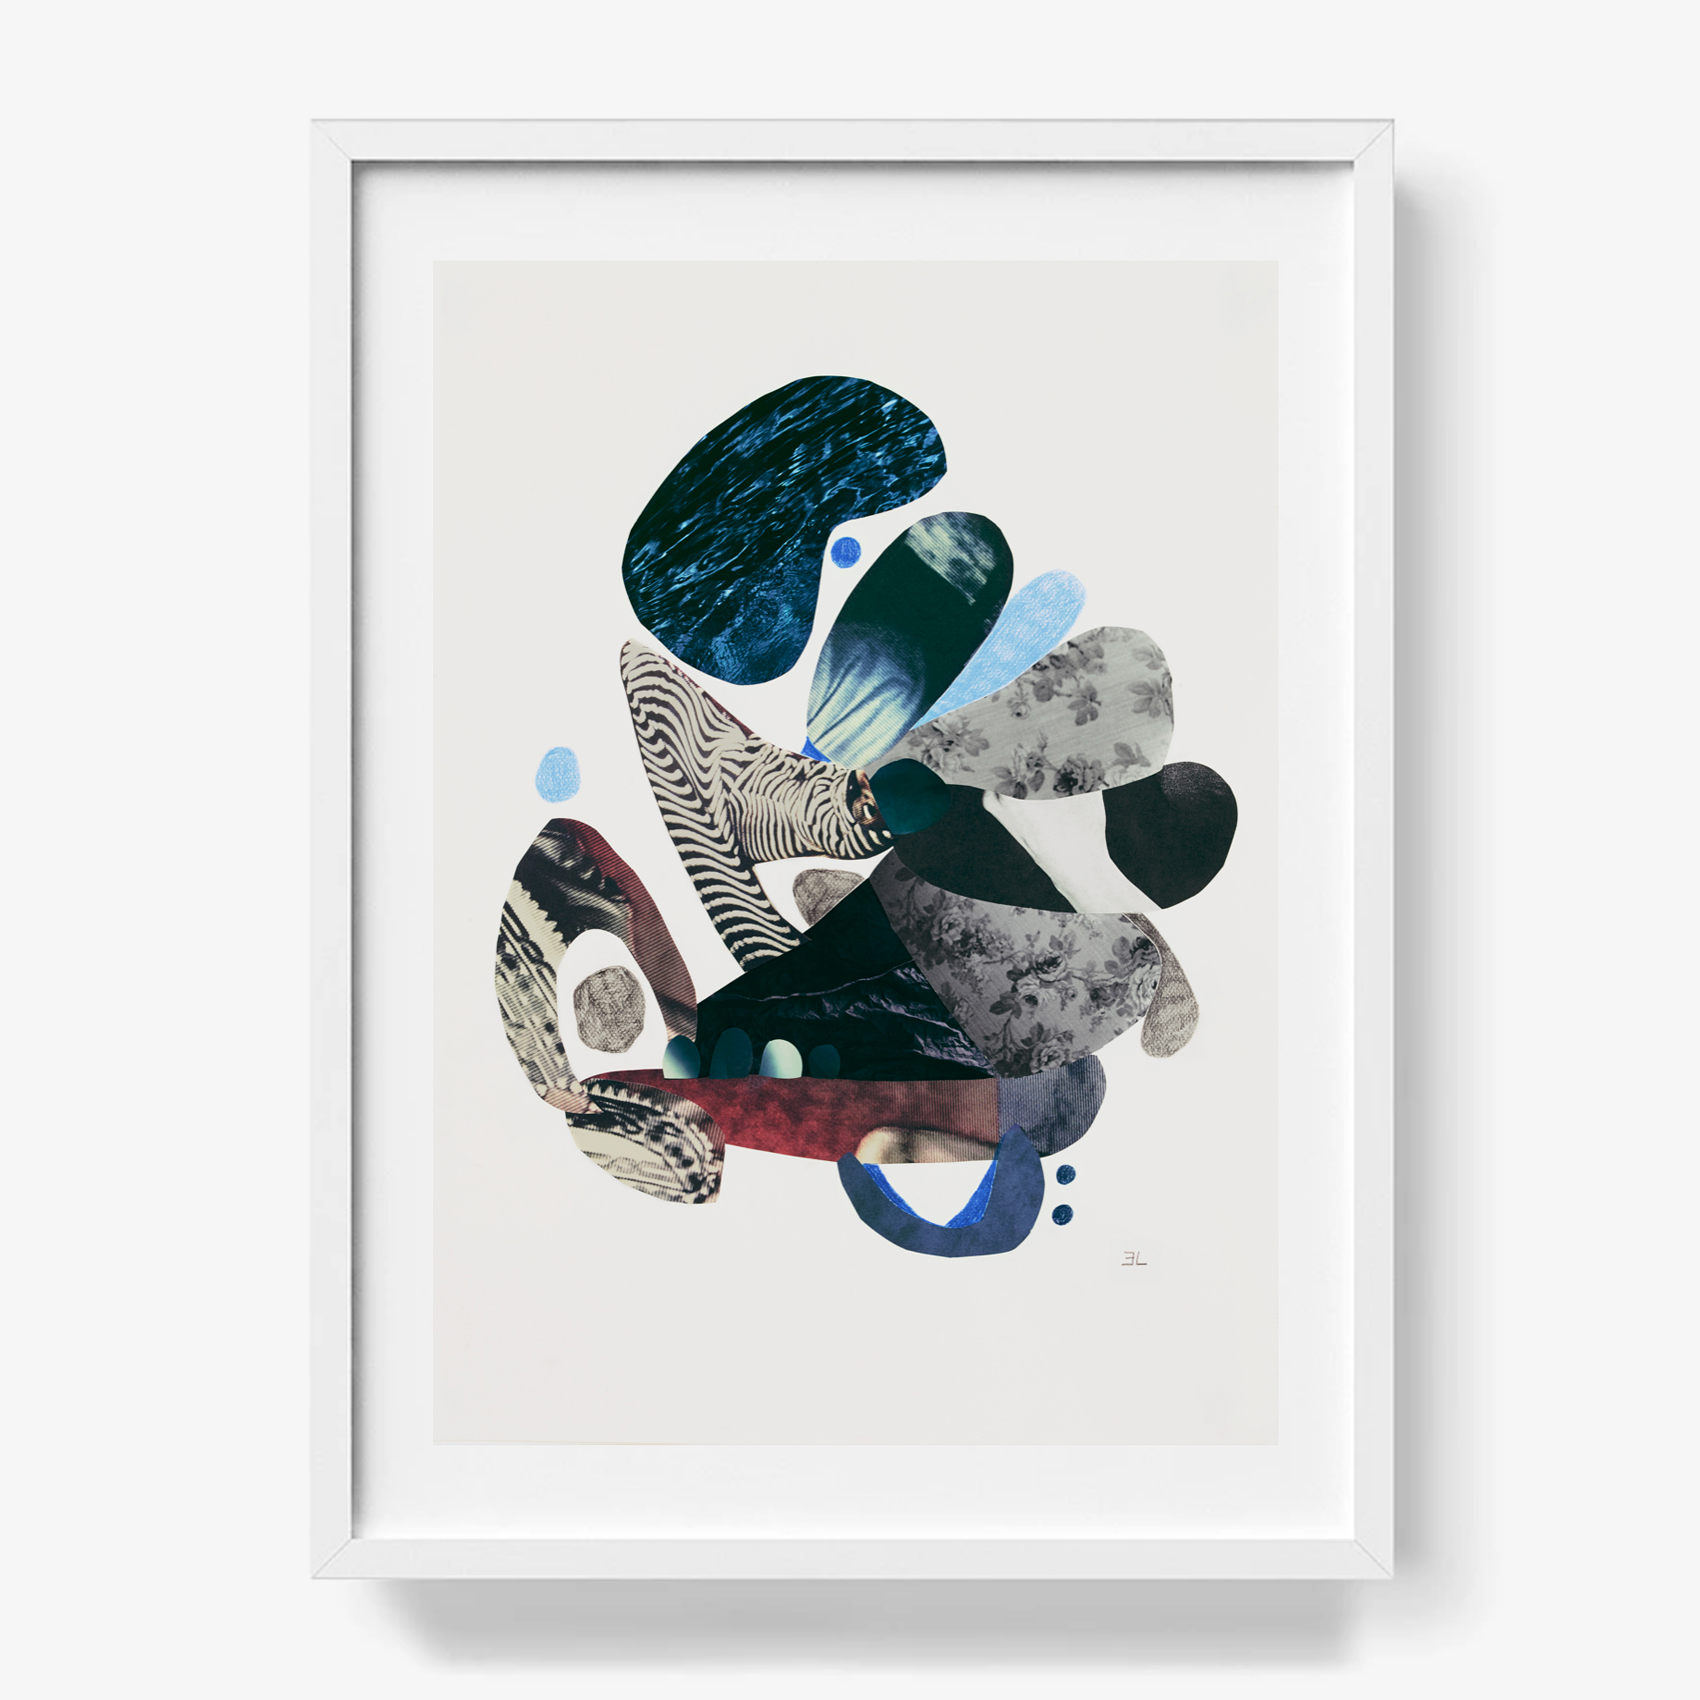 Emma Larsson COLLAGE No. 03 - Limited Edition Print